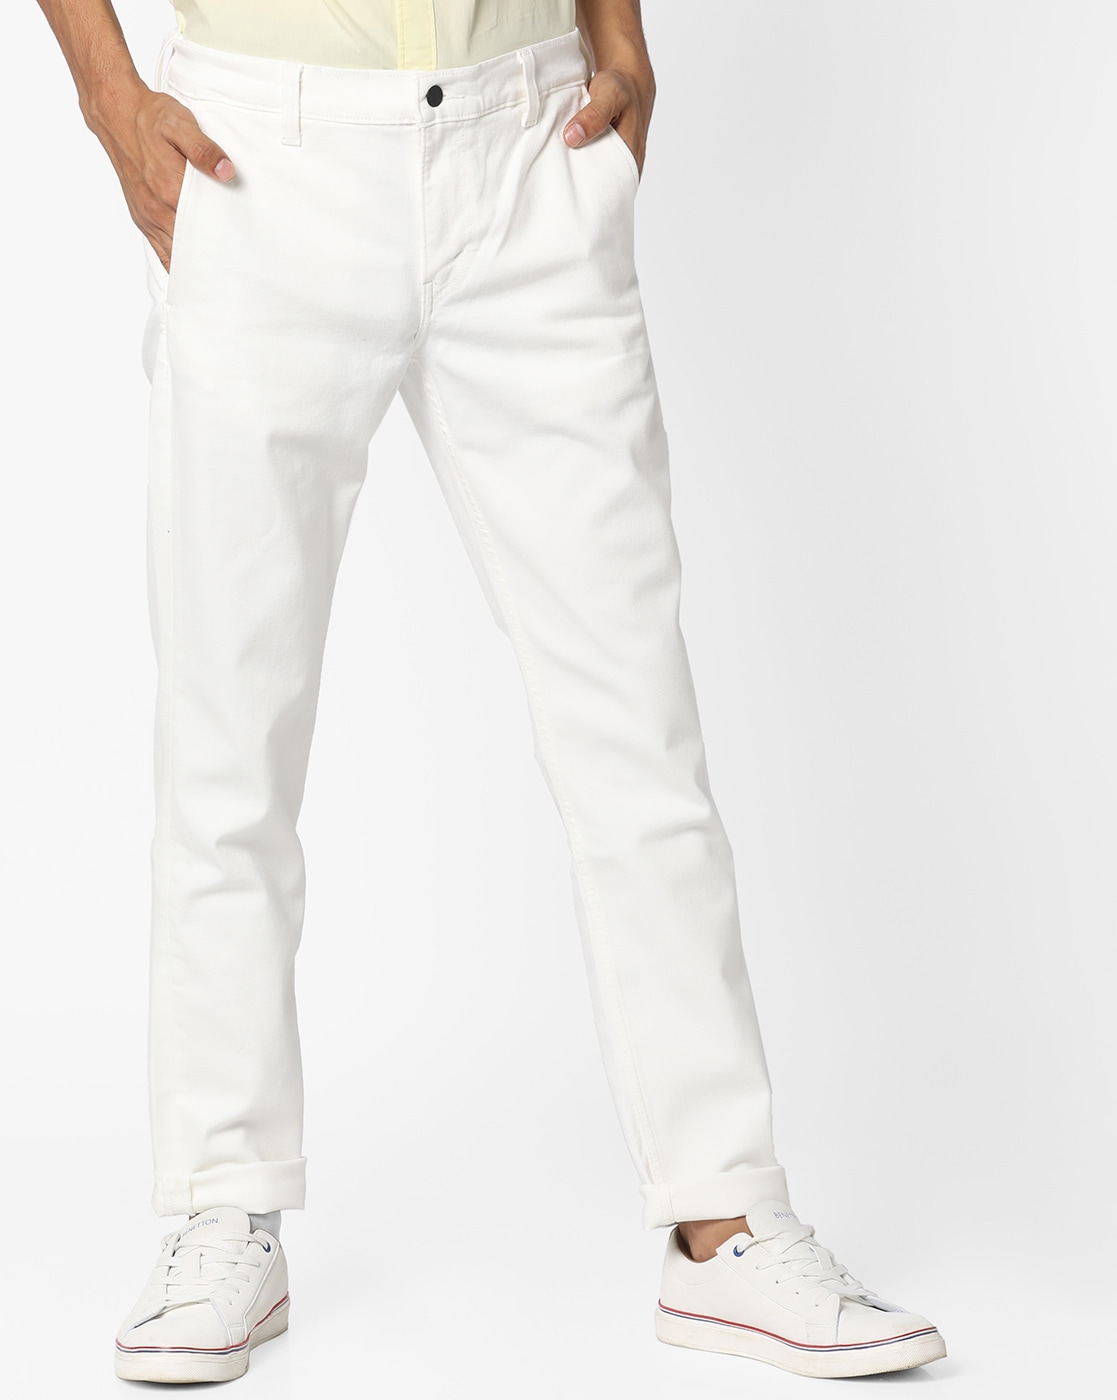 Buy Ketch White Skinny Fit Stretchable Jeans for Men Online at Rs628   Ketch